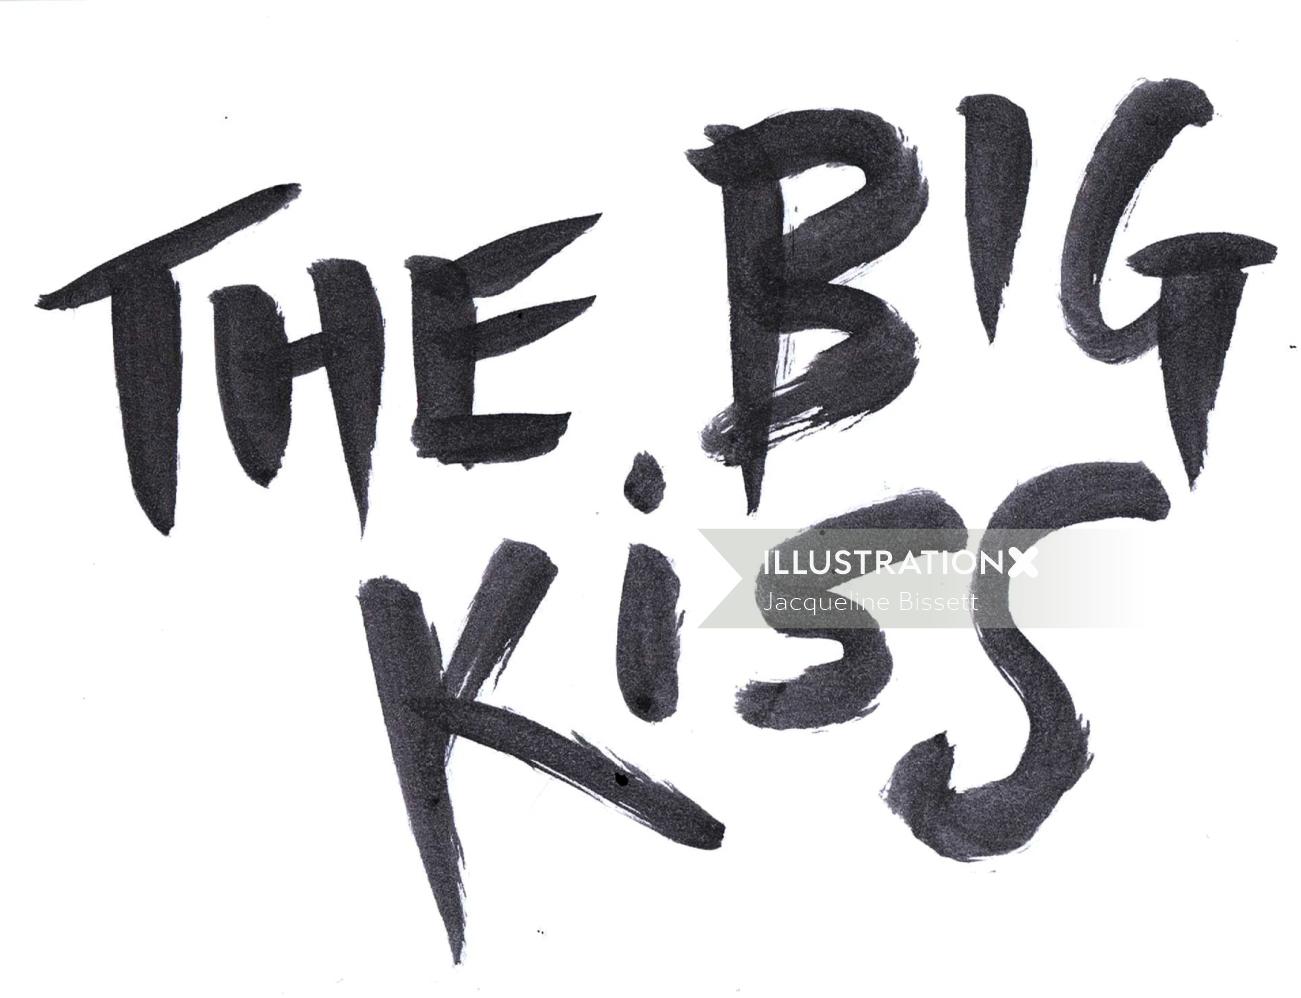 Lettering illustration of The Big Kiss